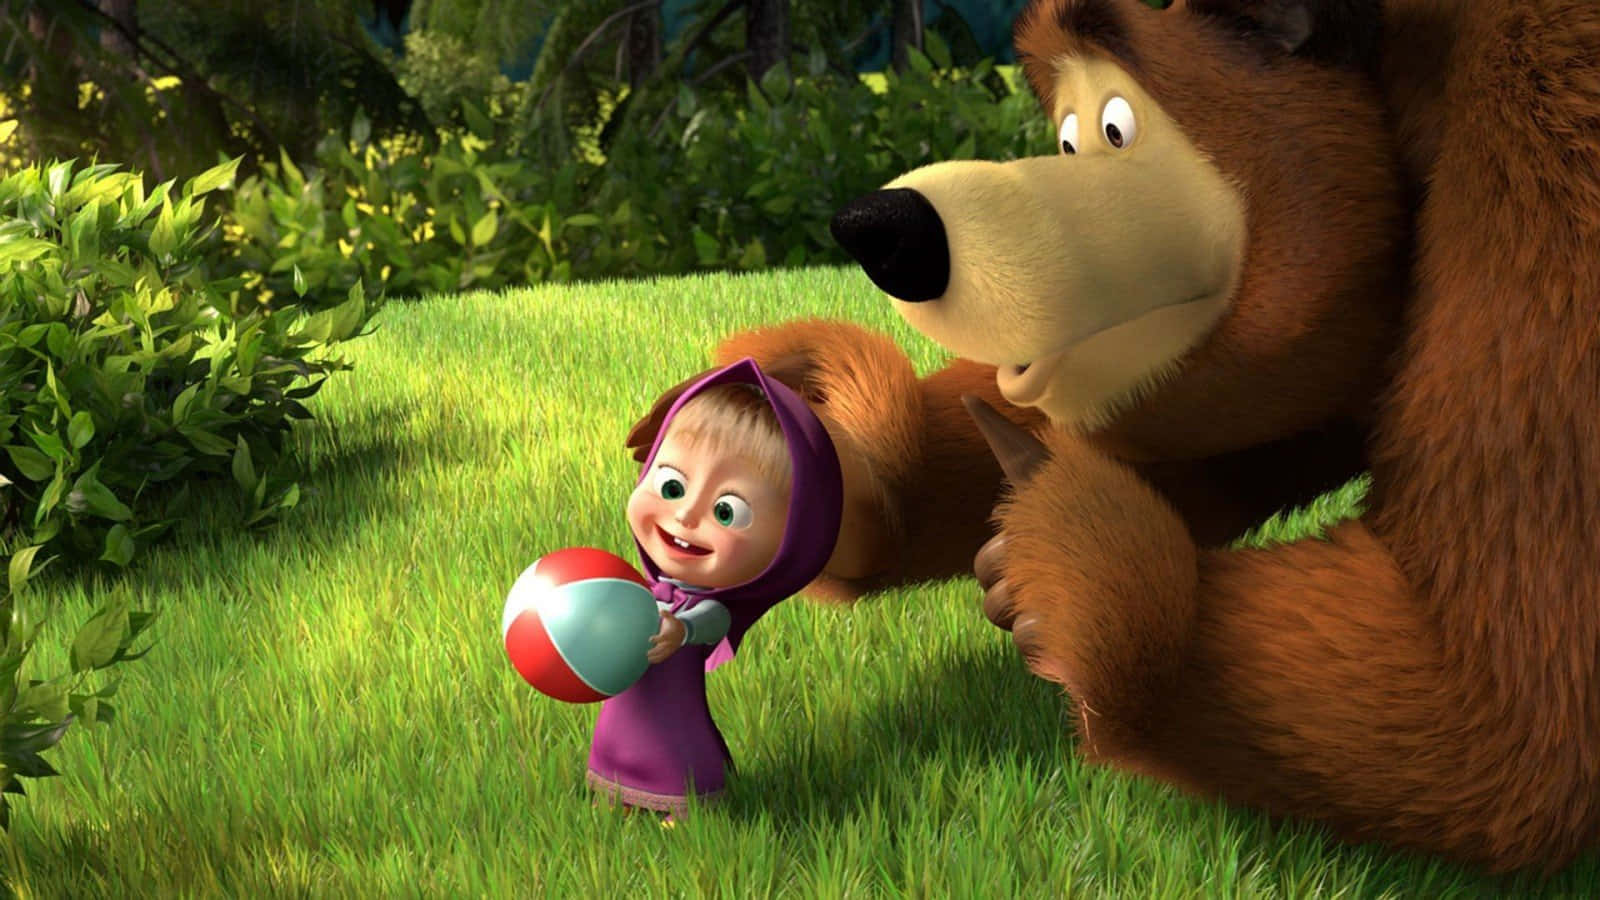 Masha and the Bear sharing a moment in the forest